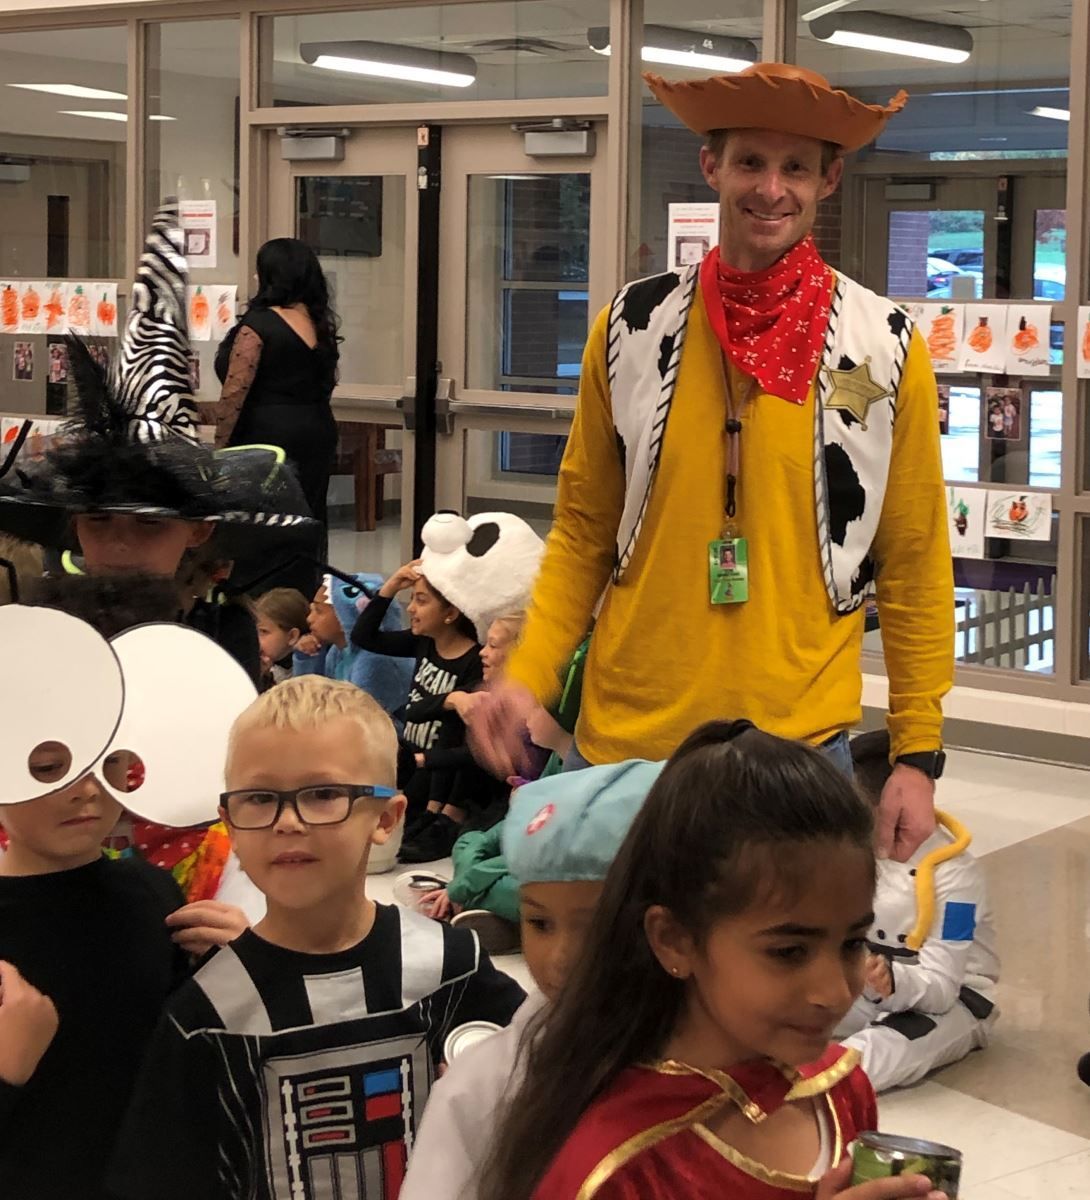 a man in a cowboy hat is standing next to a group of children in costumes